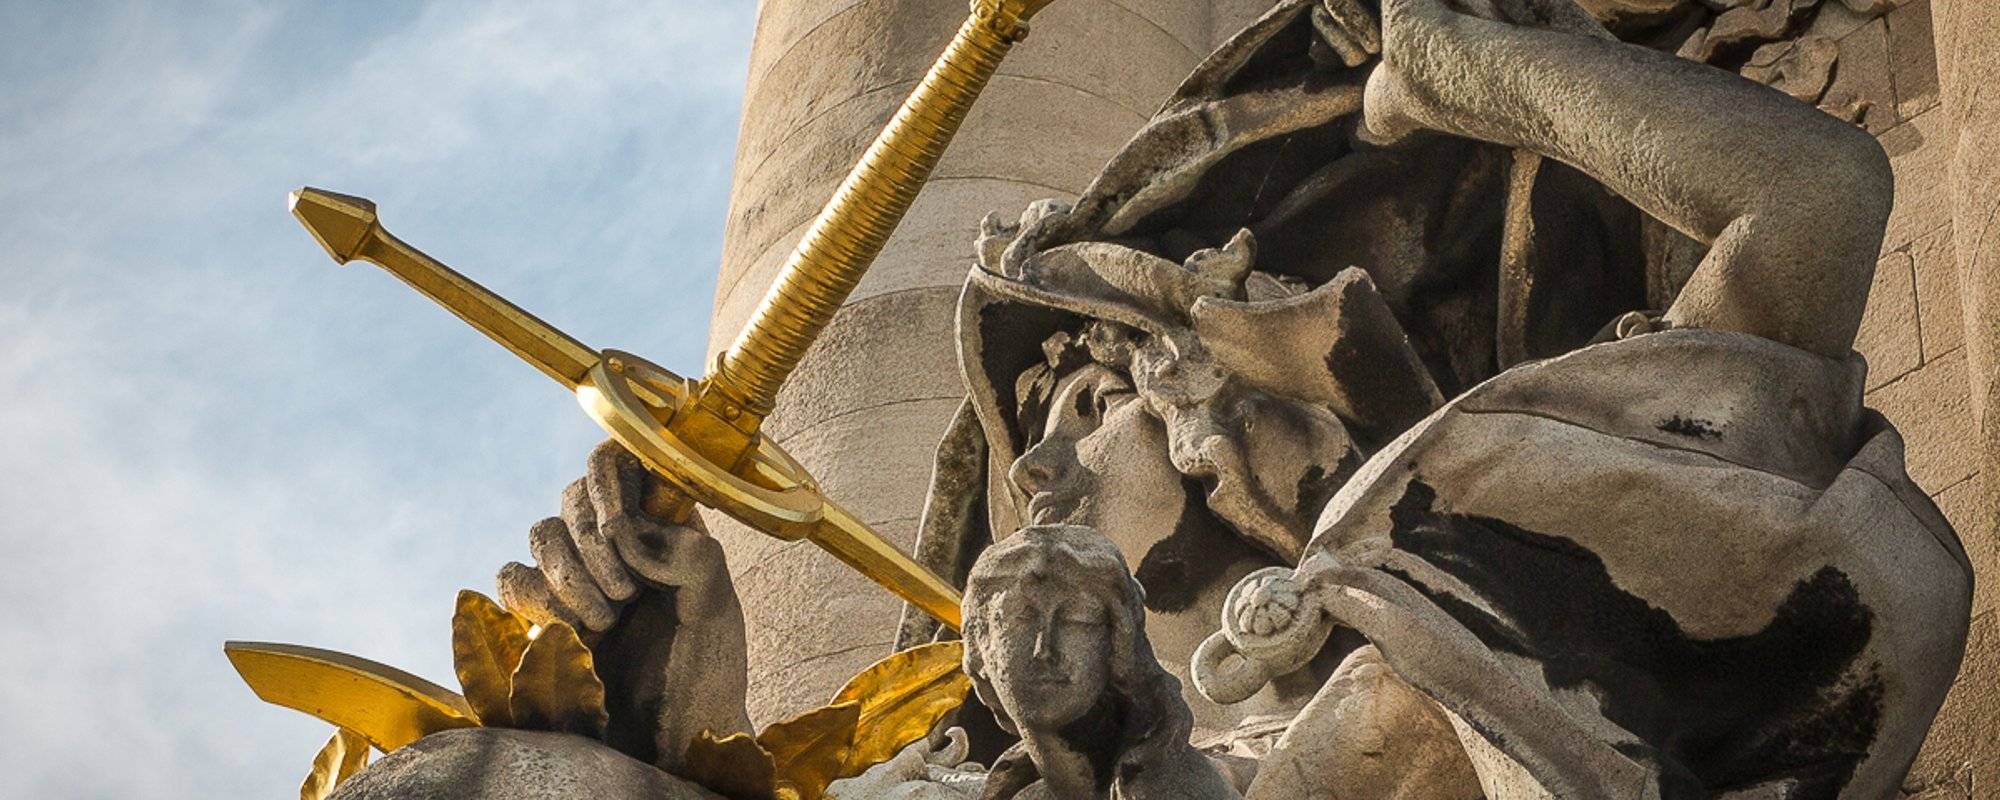 The statues of the Bridge Alexandre III, Paris - #sevendaysoutside Contest - #StatueFriday, by @erika and @photocircle